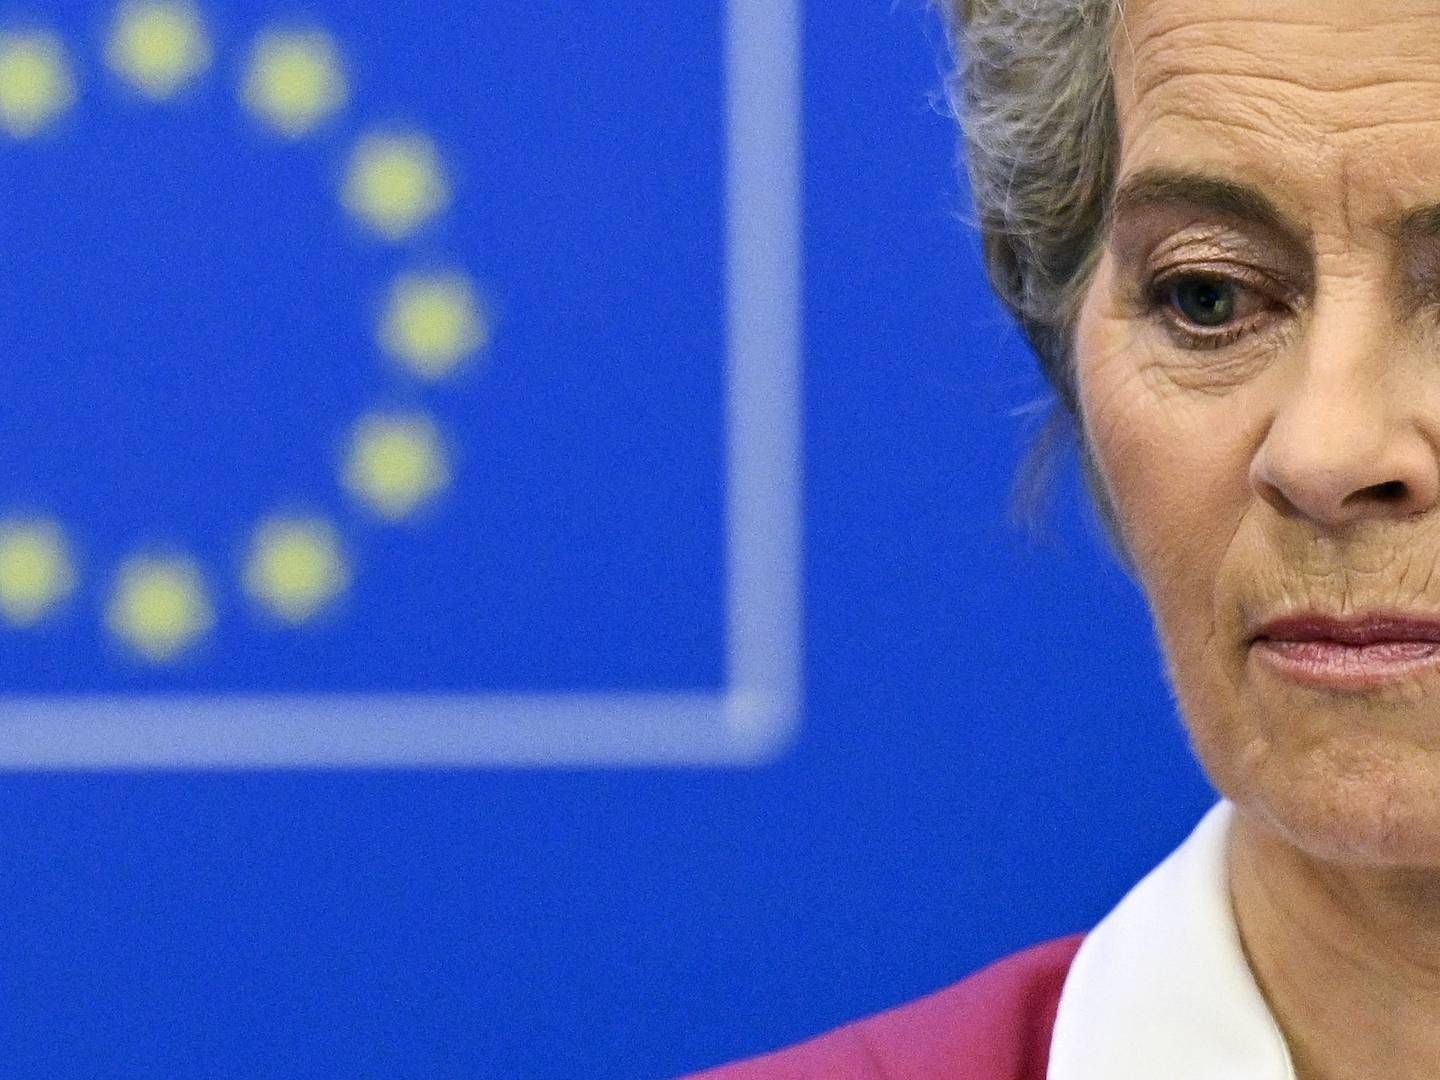 EU Commission President Ursula von der Leyen now plans to address the pricing mechanisms for gas. The market has changed dramatically, she says. | Photo: FREDERICK FLORIN/AFP / AFP